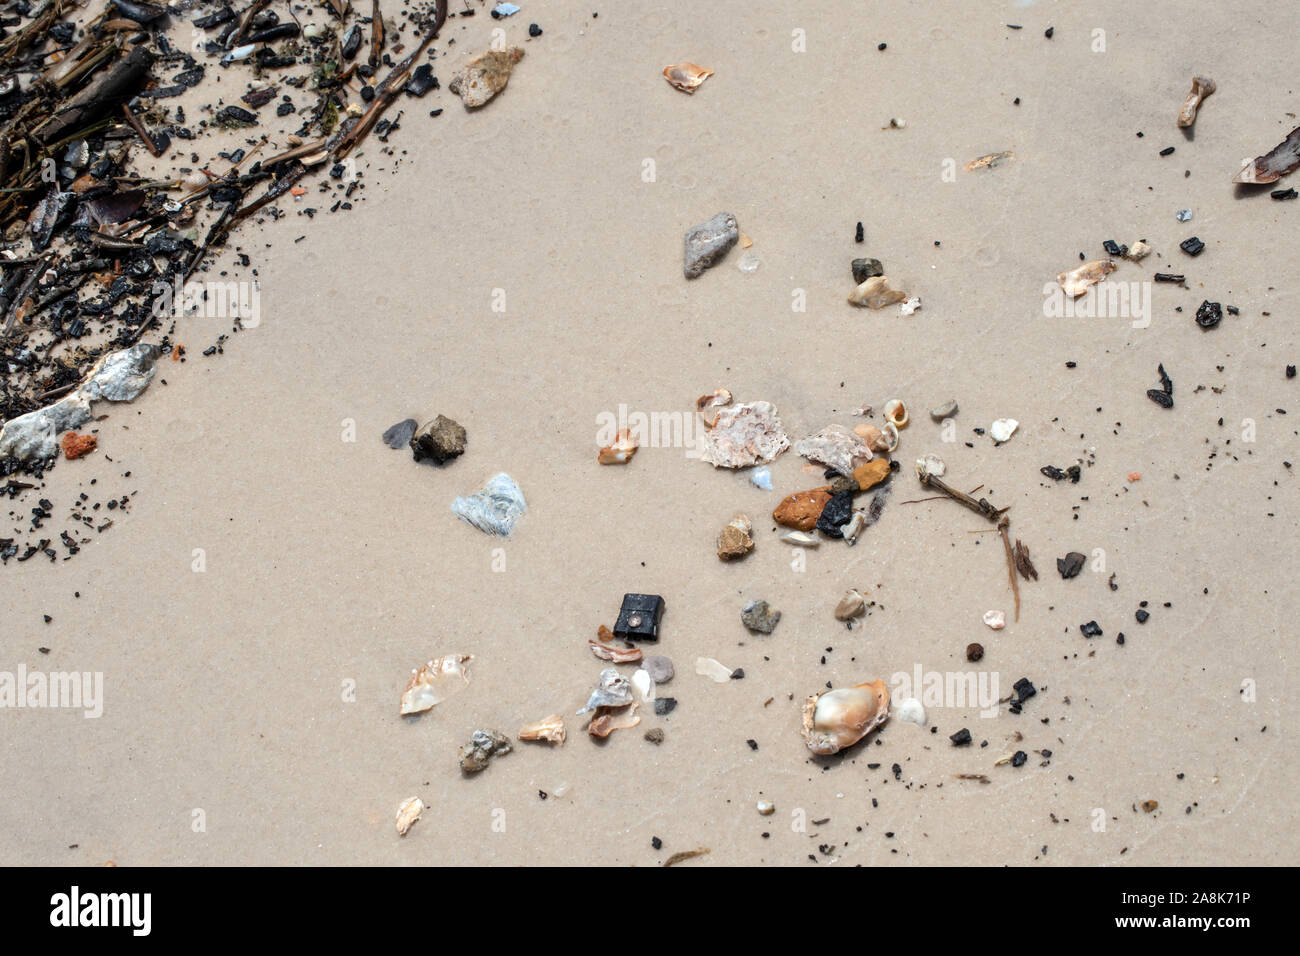 Debris and shells washed up from the ocean onto the sandy beach in Mississippi. Bokeh effect. Stock Photo